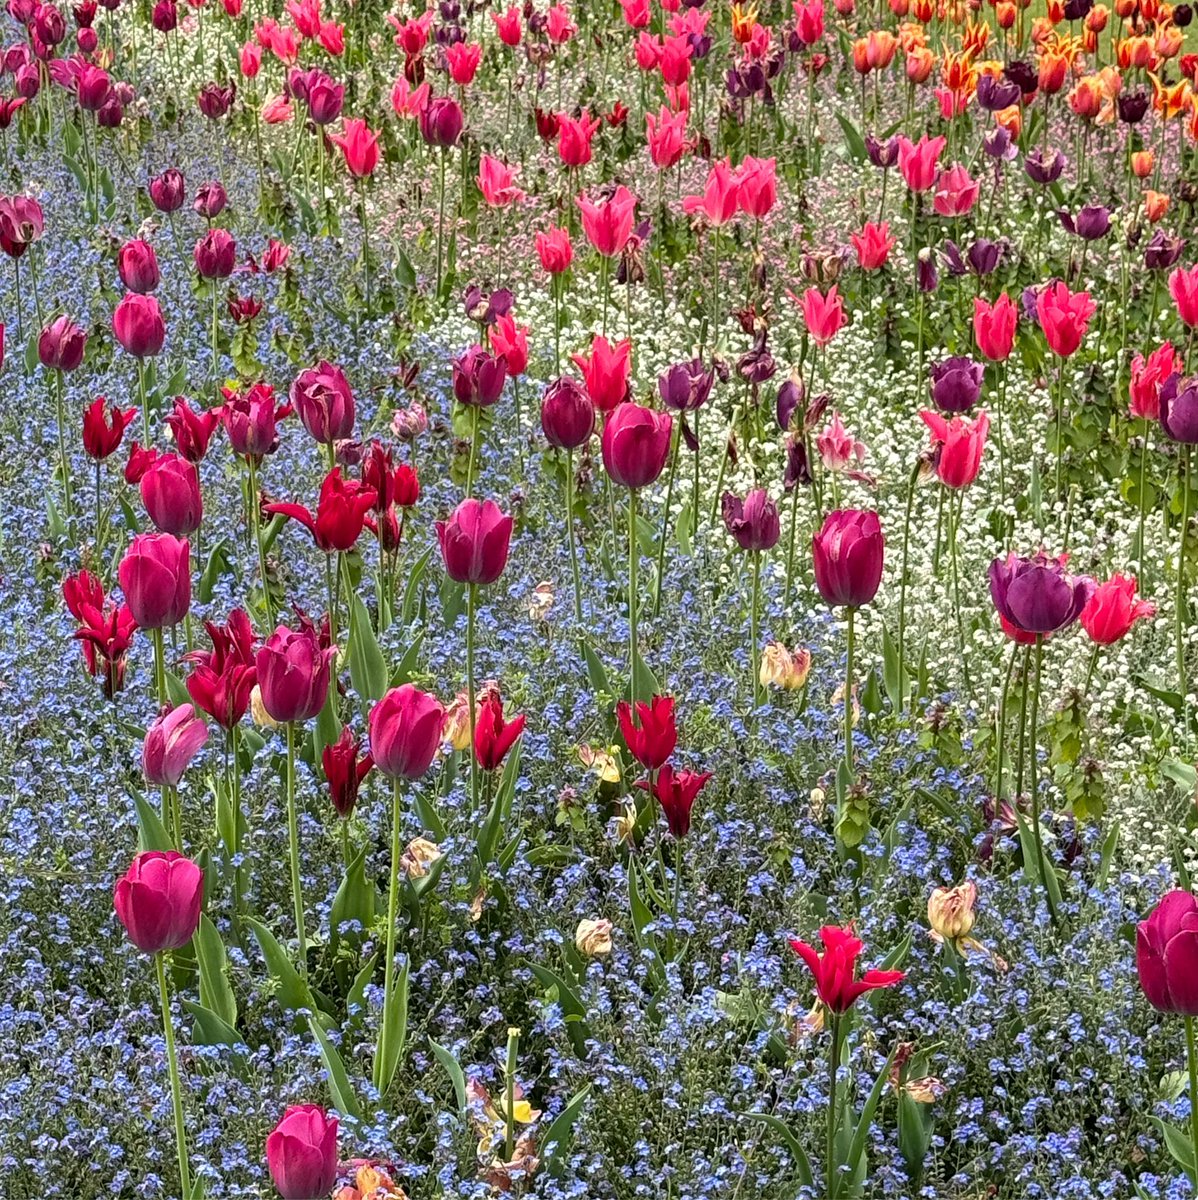 Stunning displays of tulips in the tiny park next to London’s Embankment tube stop